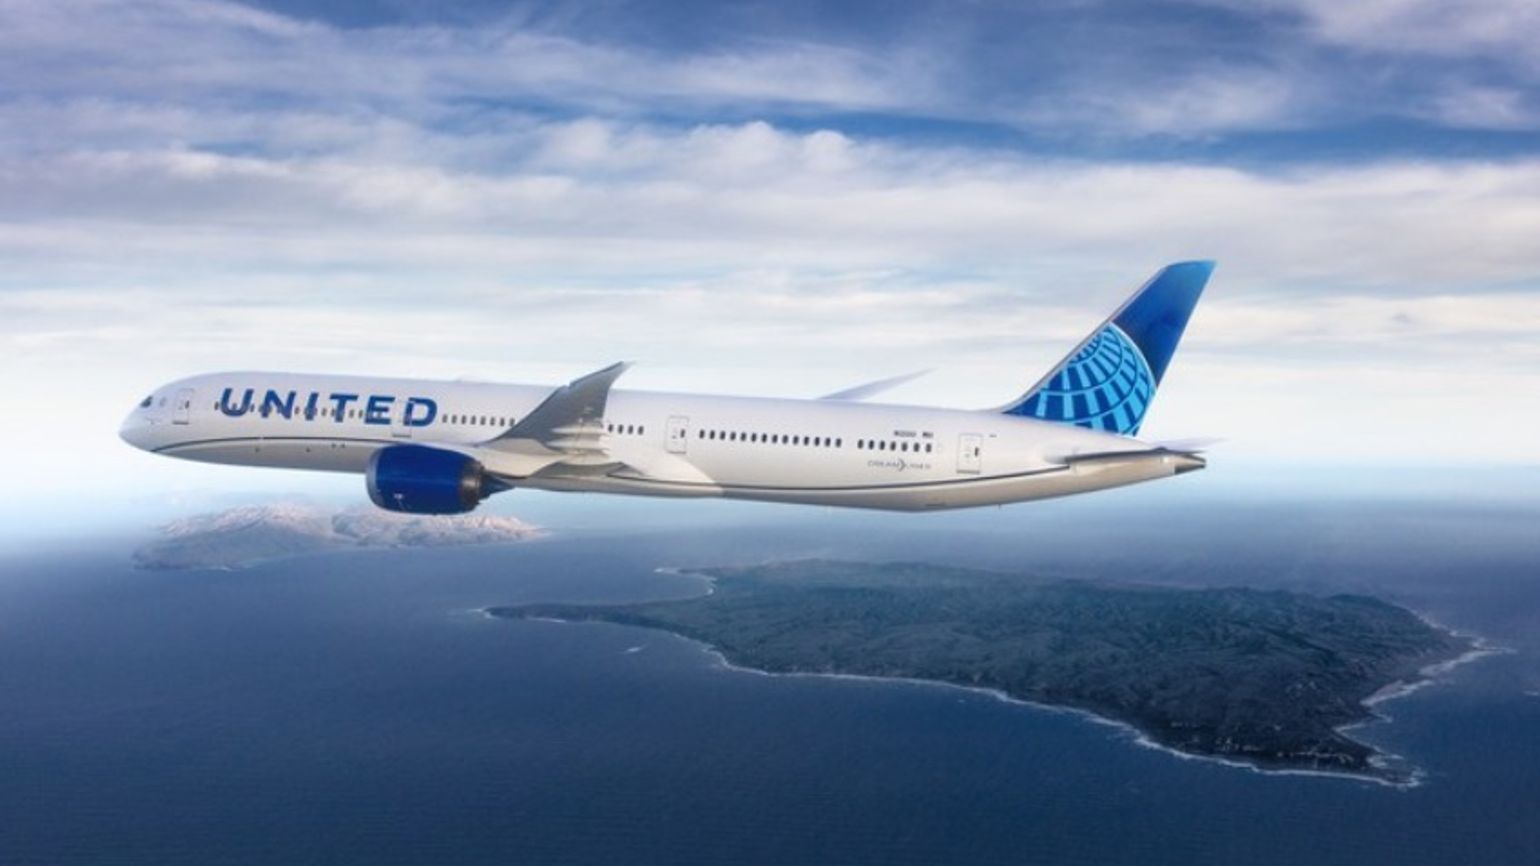 United Airlines orders 100 new Dreamliners from Boeing